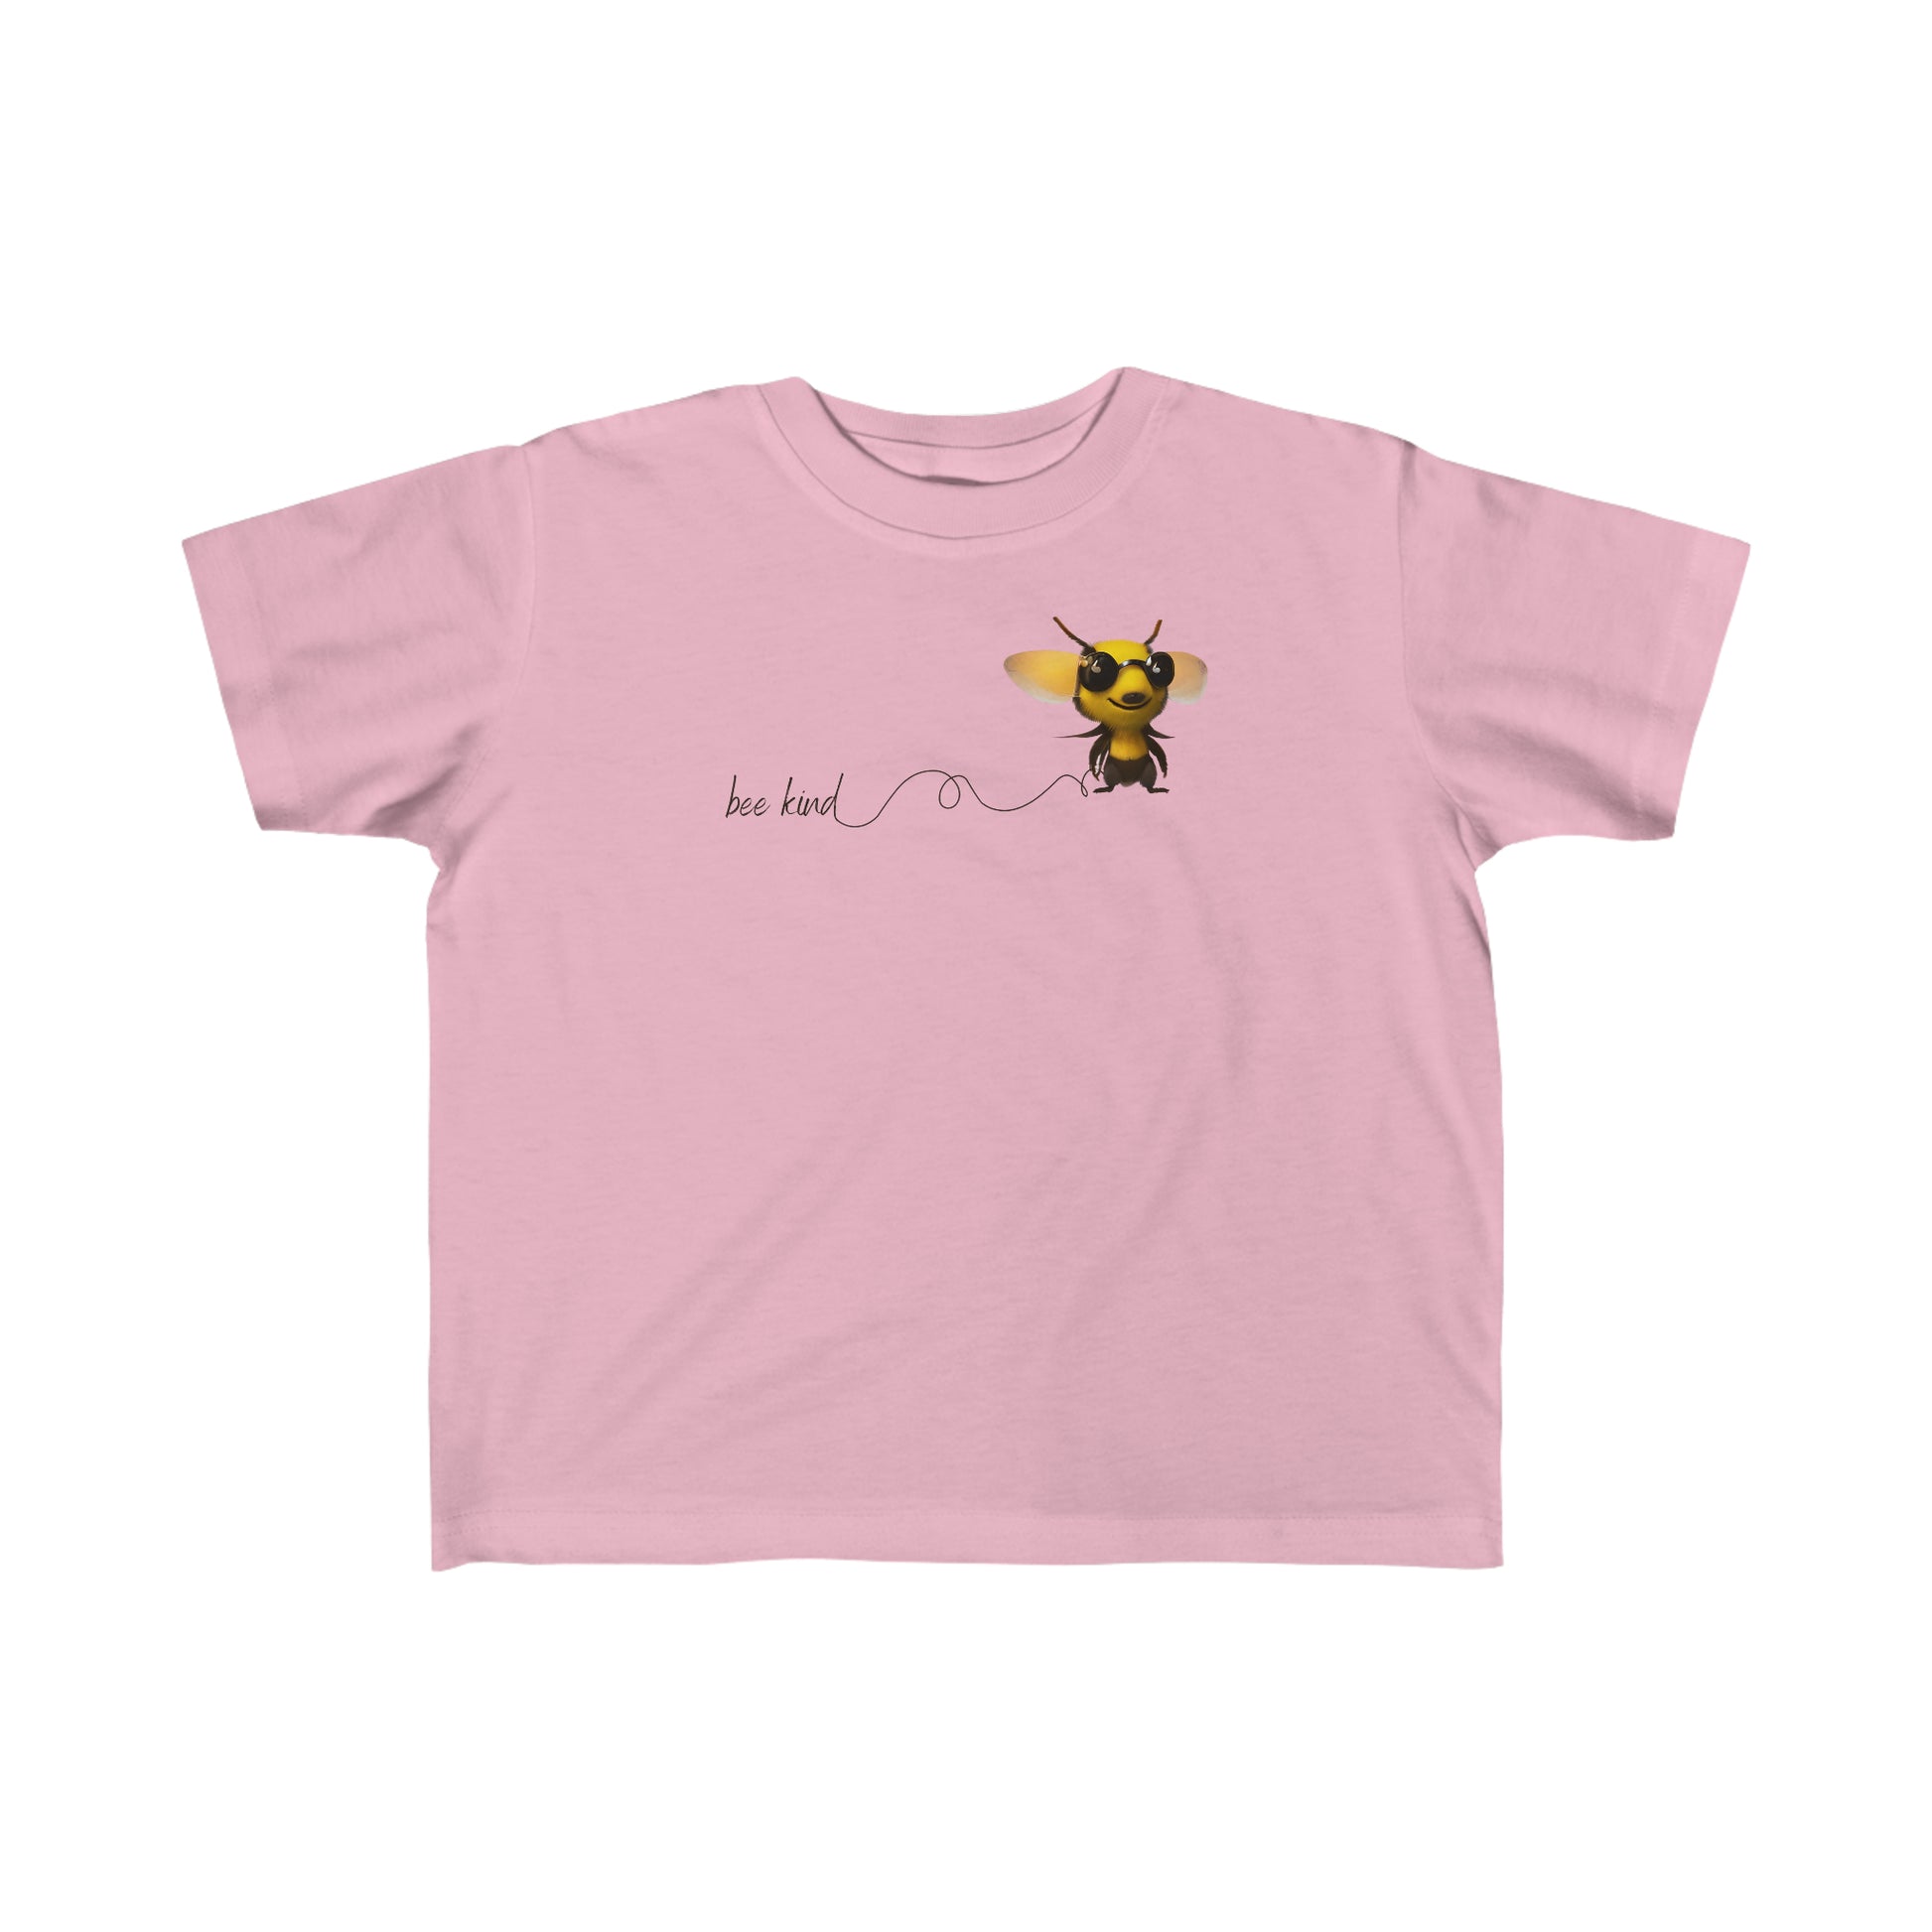 Bee Kind Kids T-Shirt in Pink